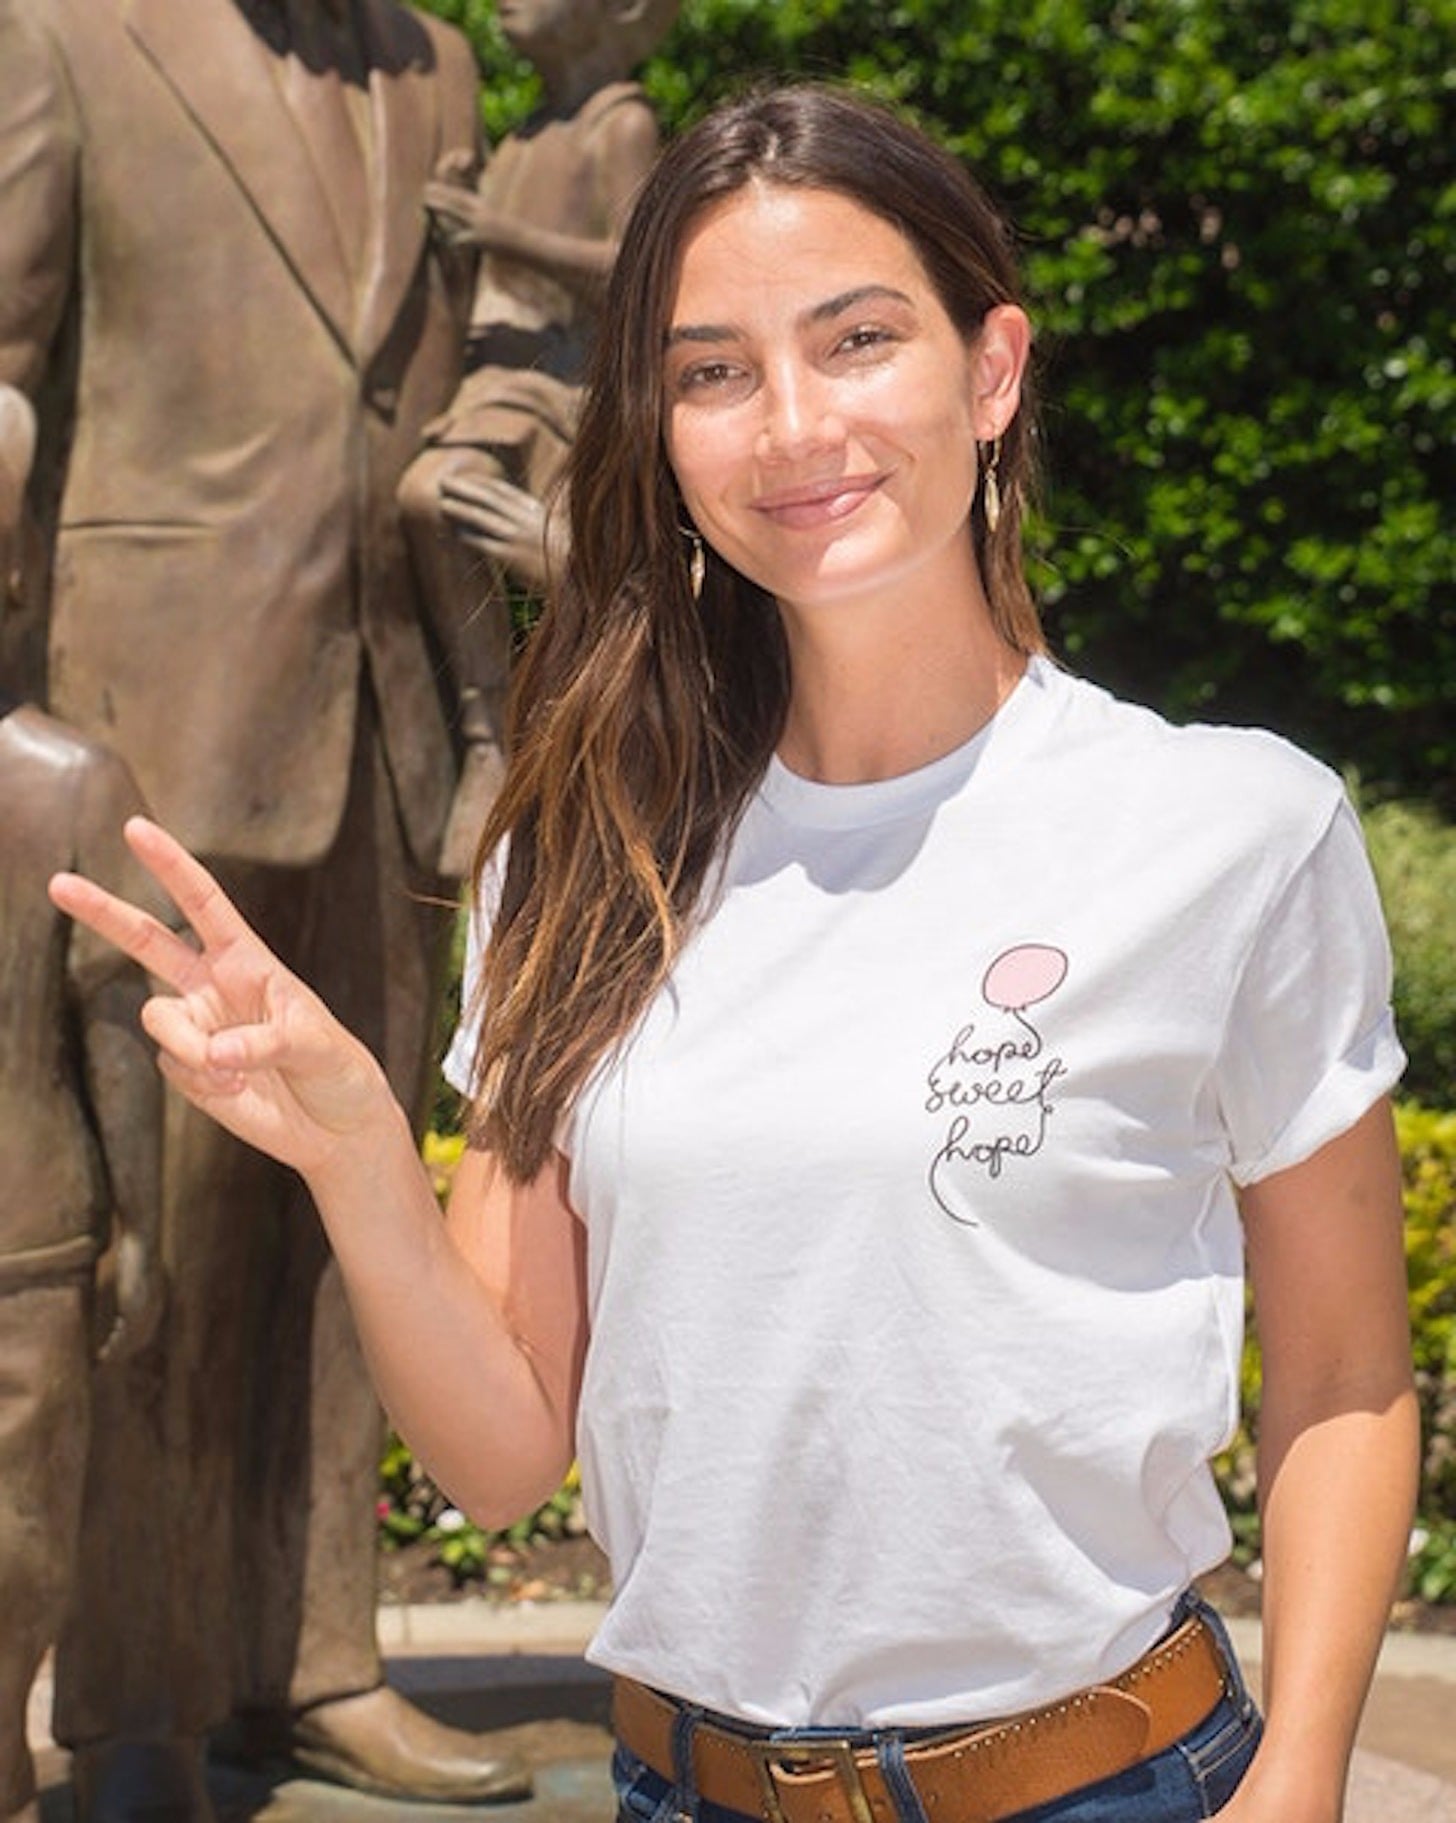 Classic Casual: Lily Aldridge's Sleeveless Blouse and Girlfriend Jean Look  for Less - The Budget Babe